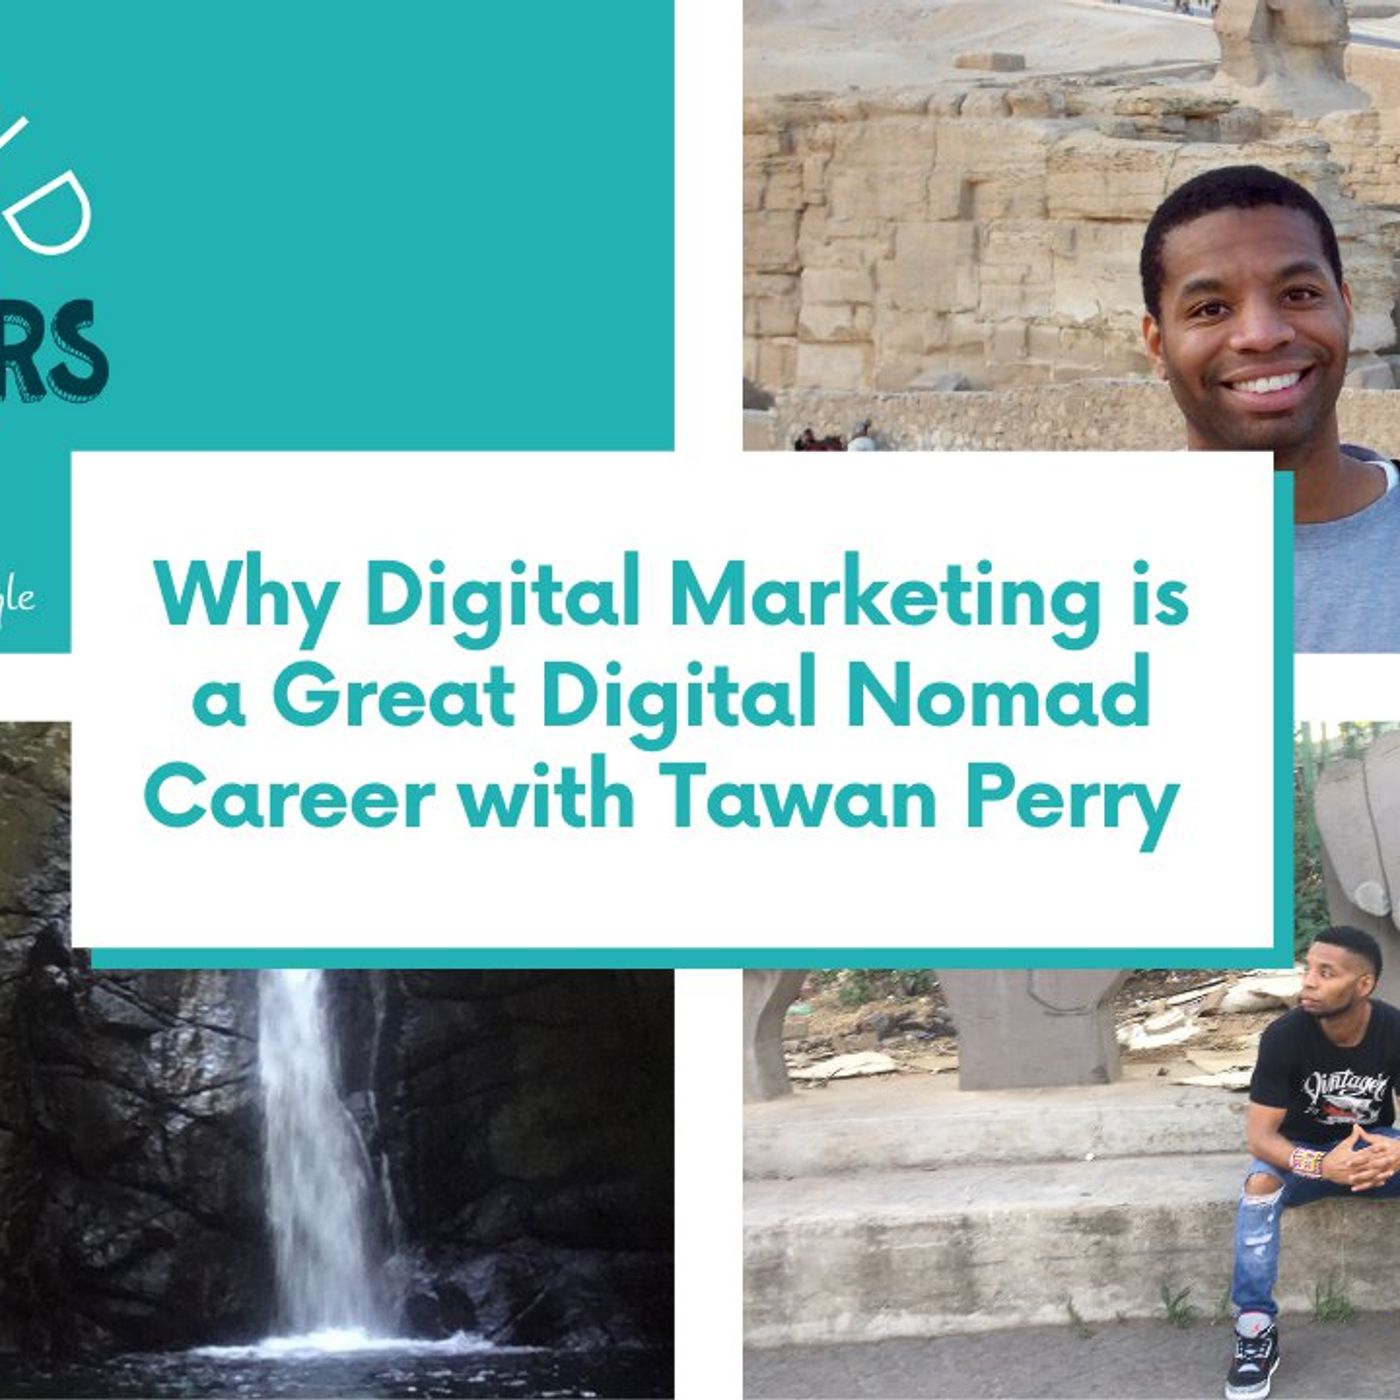 Why Digital Marketing is a Great Digital Nomad Career